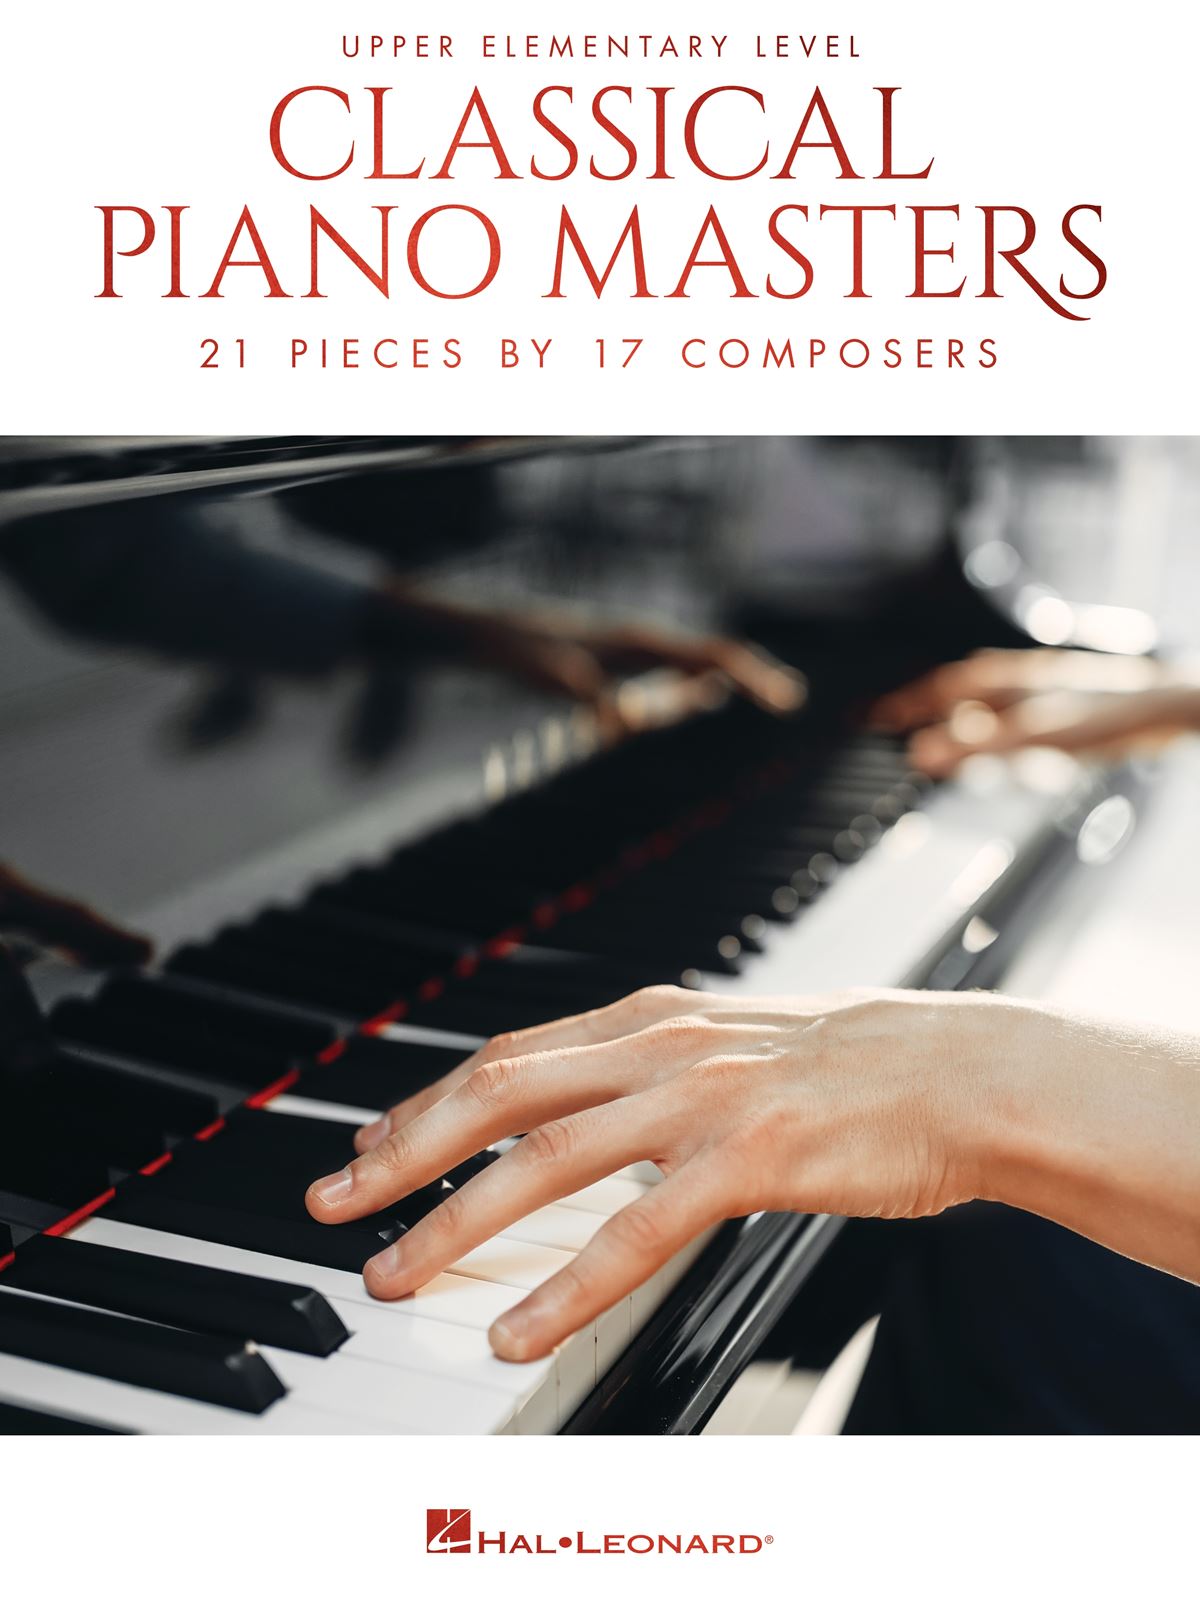 Classical Piano Masters: Upper Elementary